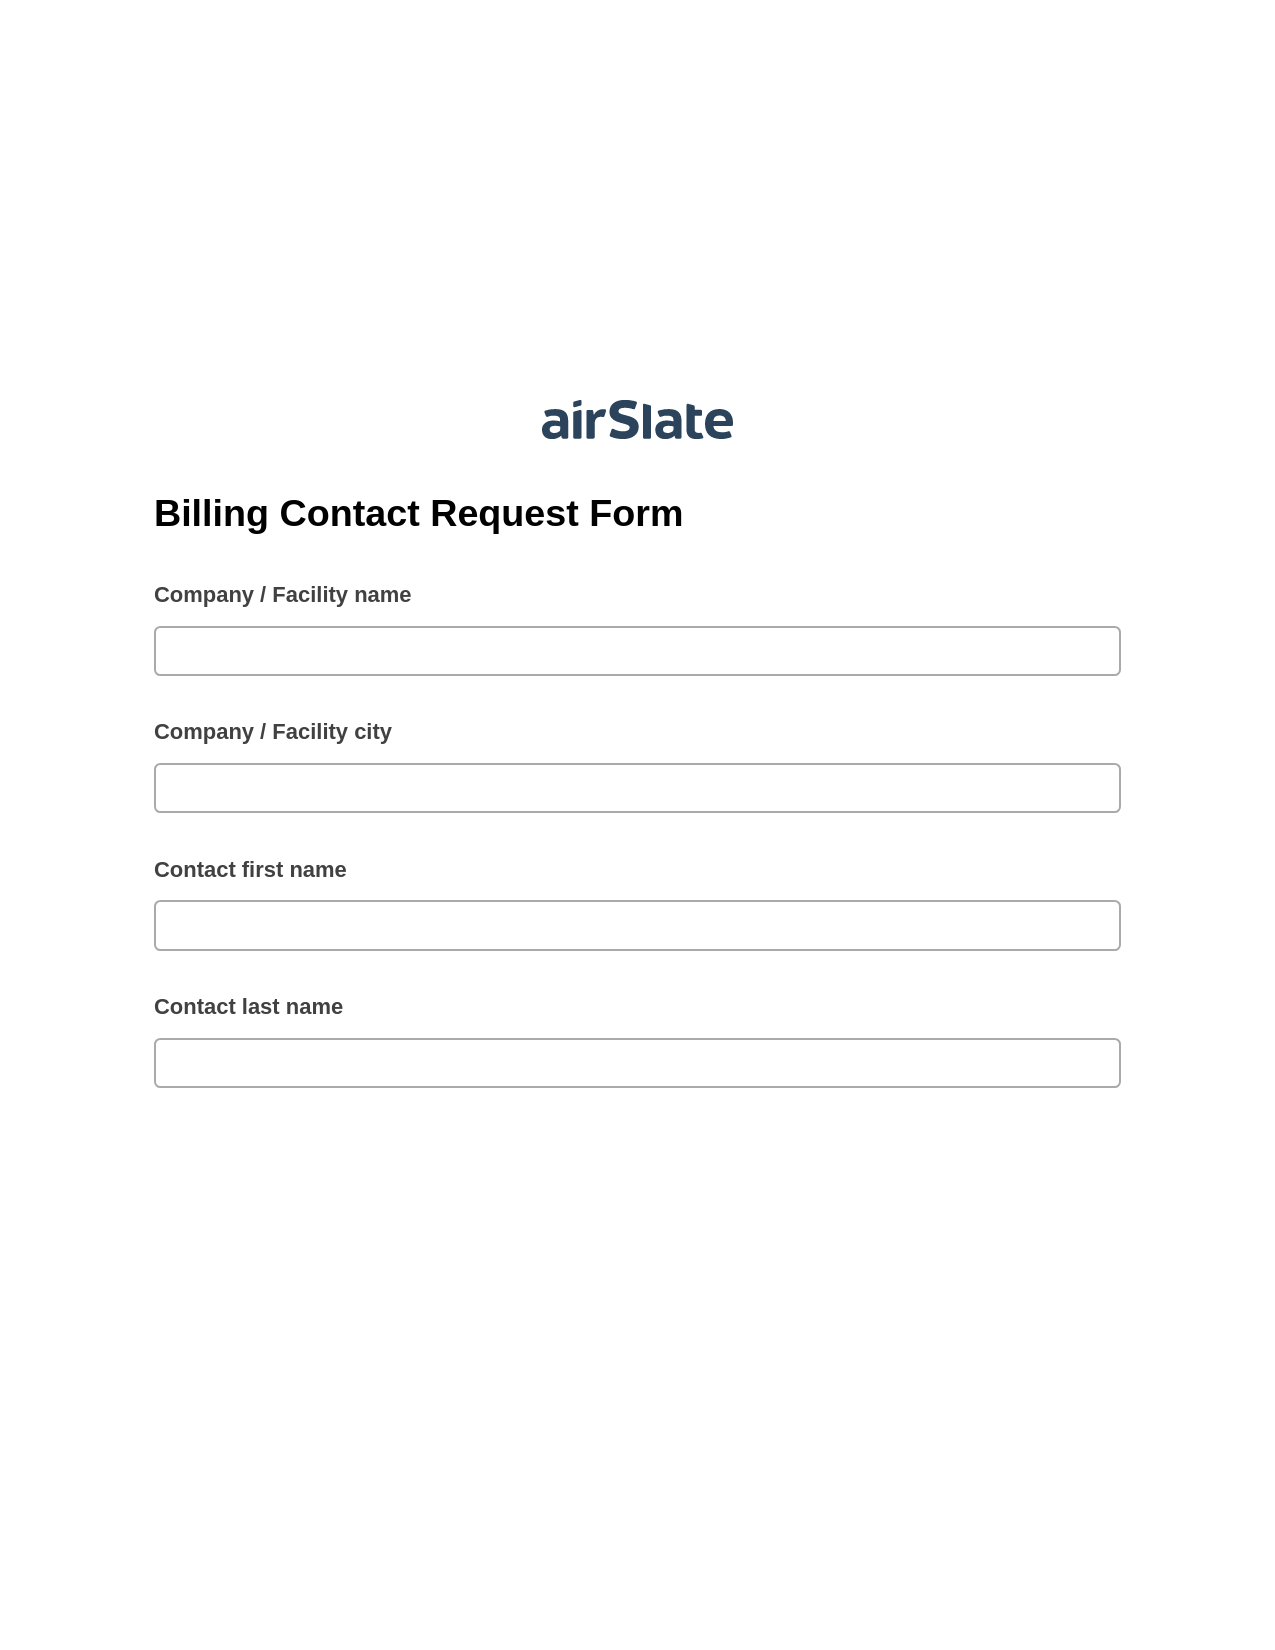 Multirole Billing Contact Request Form Pre-fill Dropdown from Airtable, Update MS Dynamics 365 Records Bot, Export to MySQL Bot